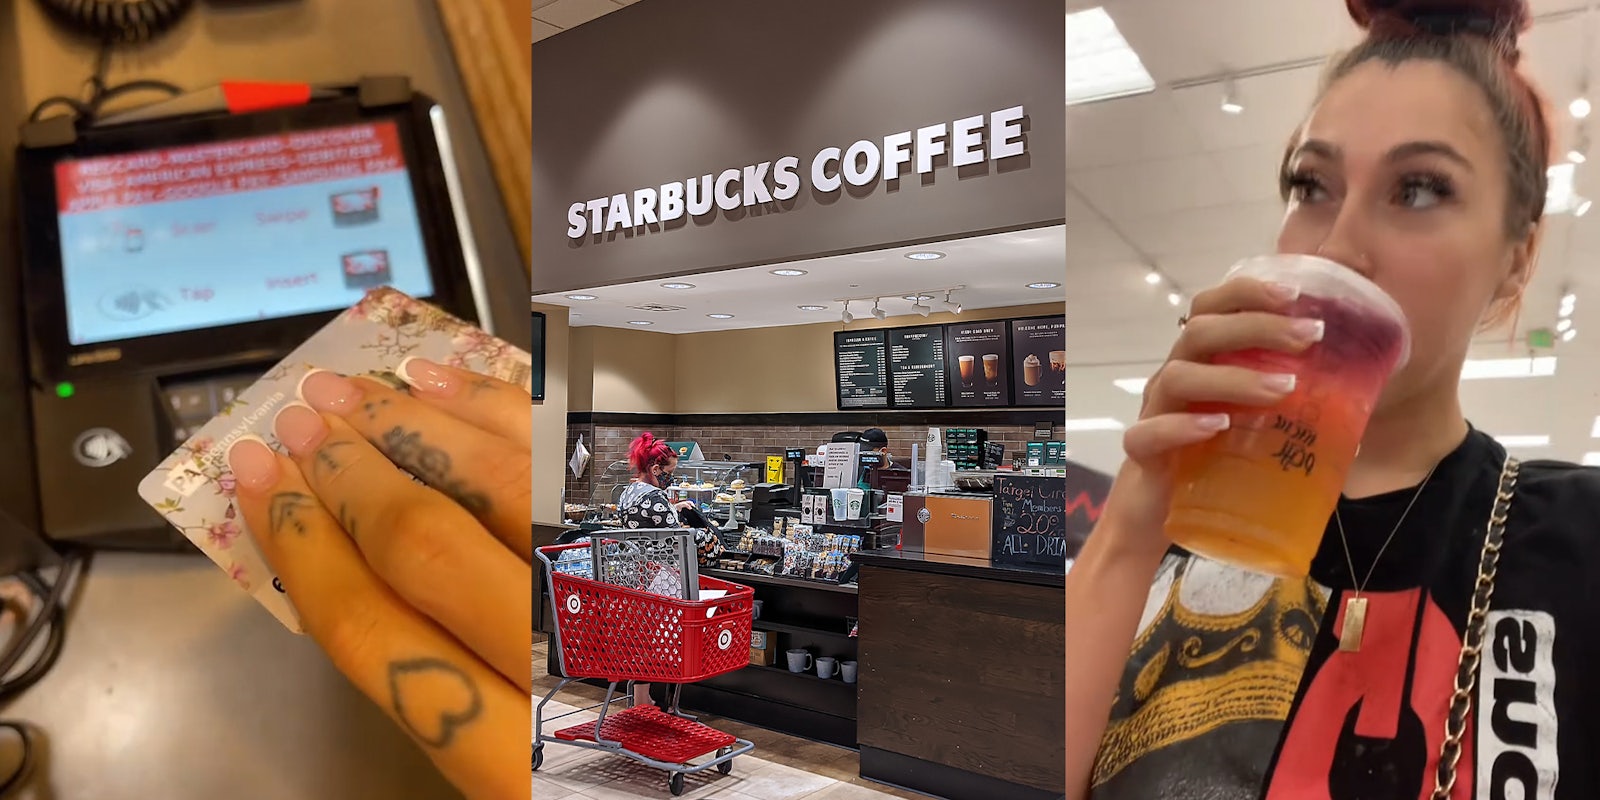 Woman orders Starbucks with food stamps at Target